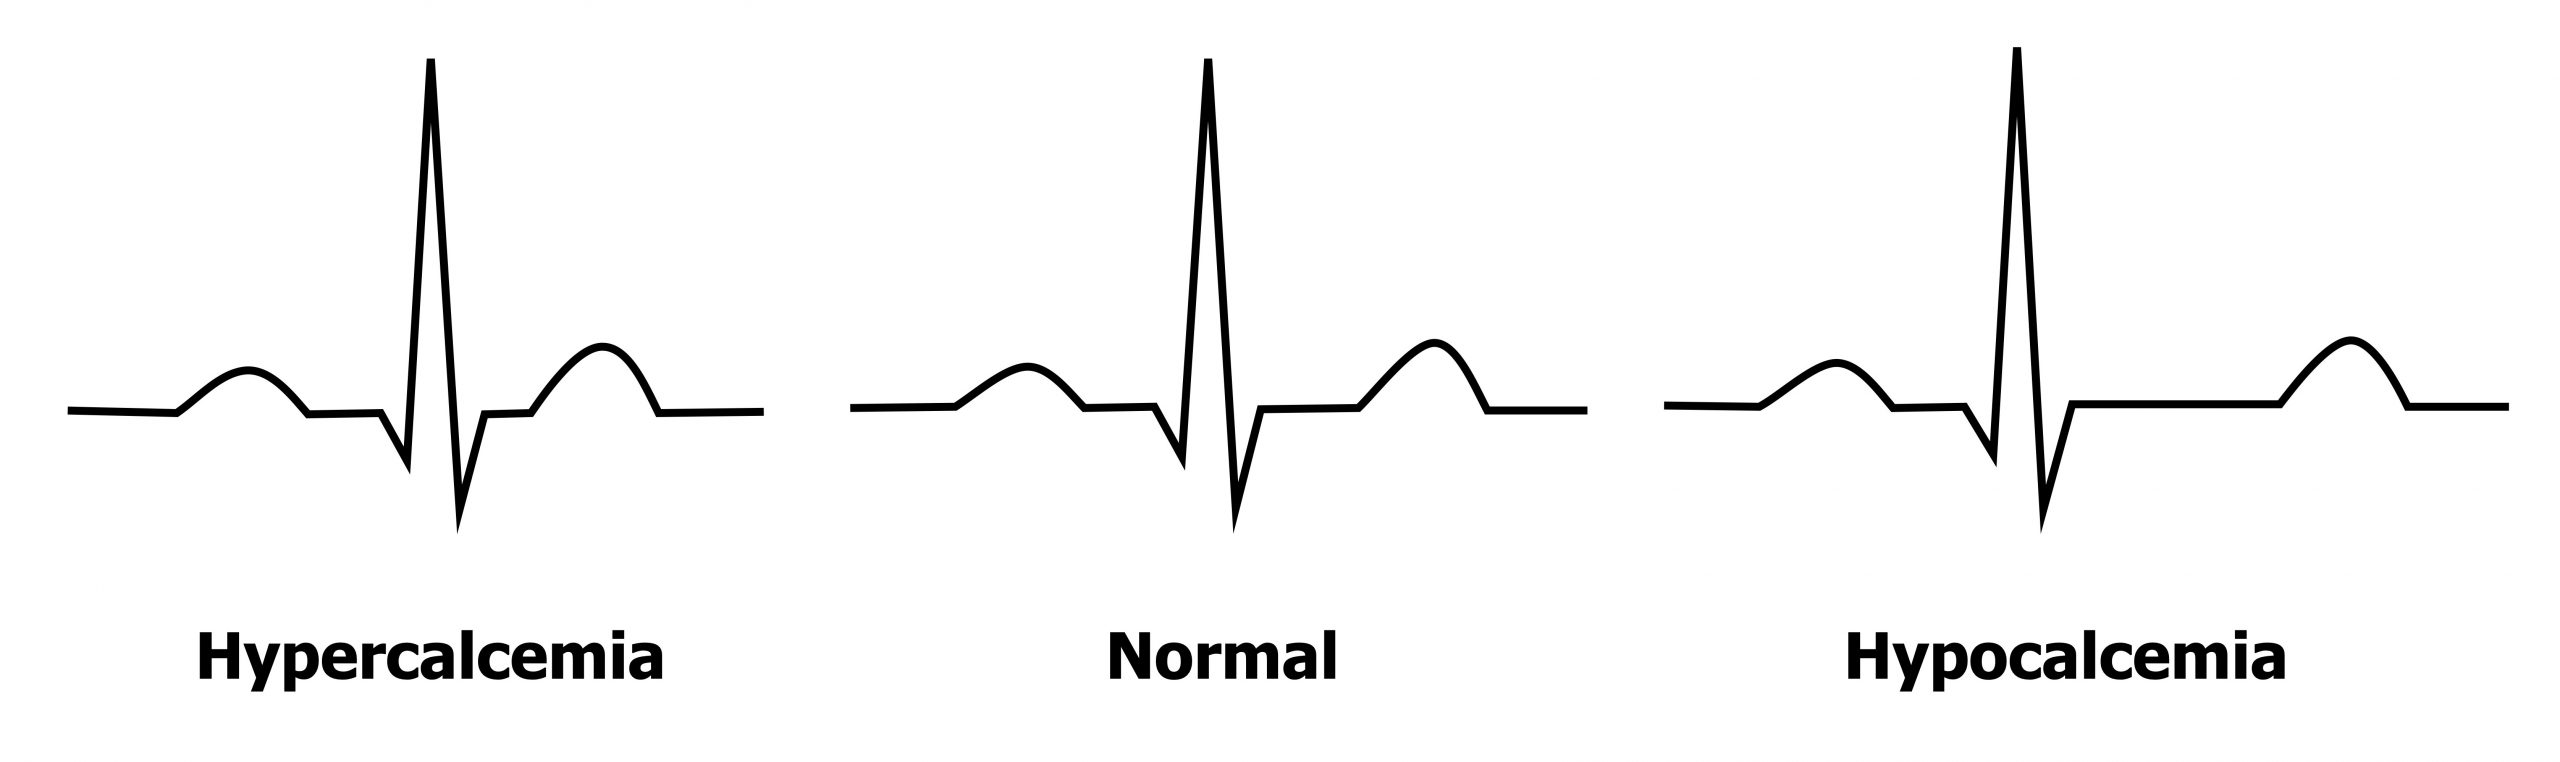 The figure shows three ECGs. The ECGs are typical of hypocalcemia, hypercalcemia, and a normal ECG for comparison. The hypercalcemia ECG shows a shortened Q-T interval whereas the hypocalcemia ECG shows a prolonged Q-T interval compared to the normal.